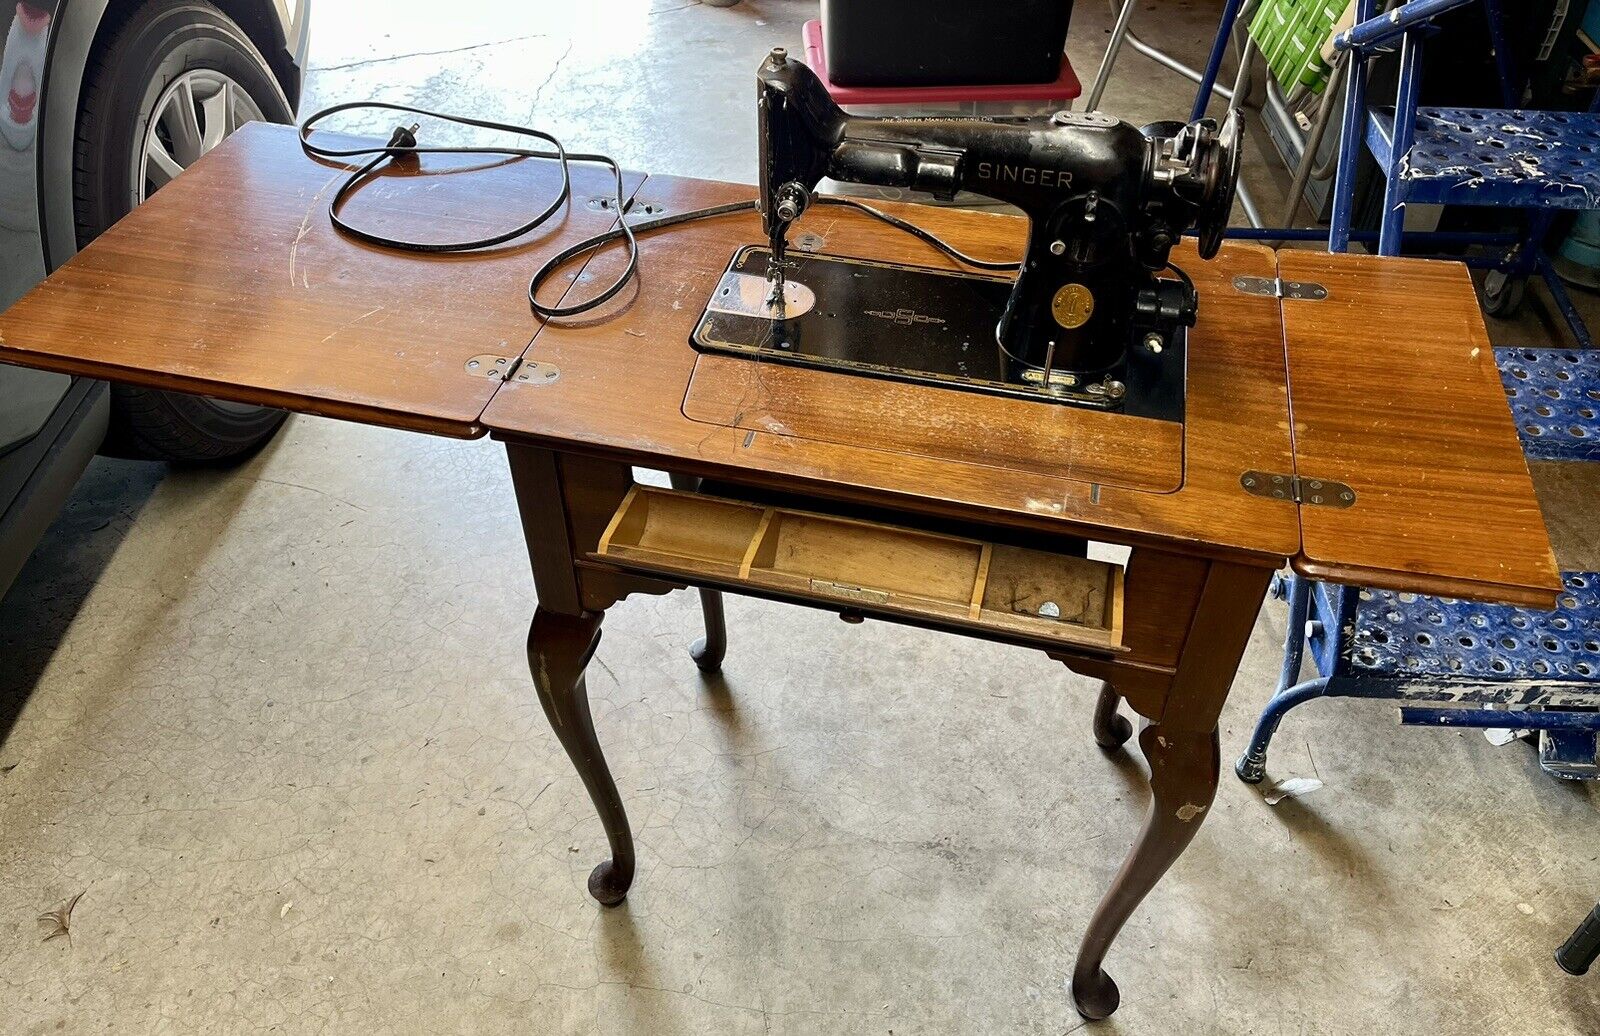 Vintage Singer Sewing Machine And Table